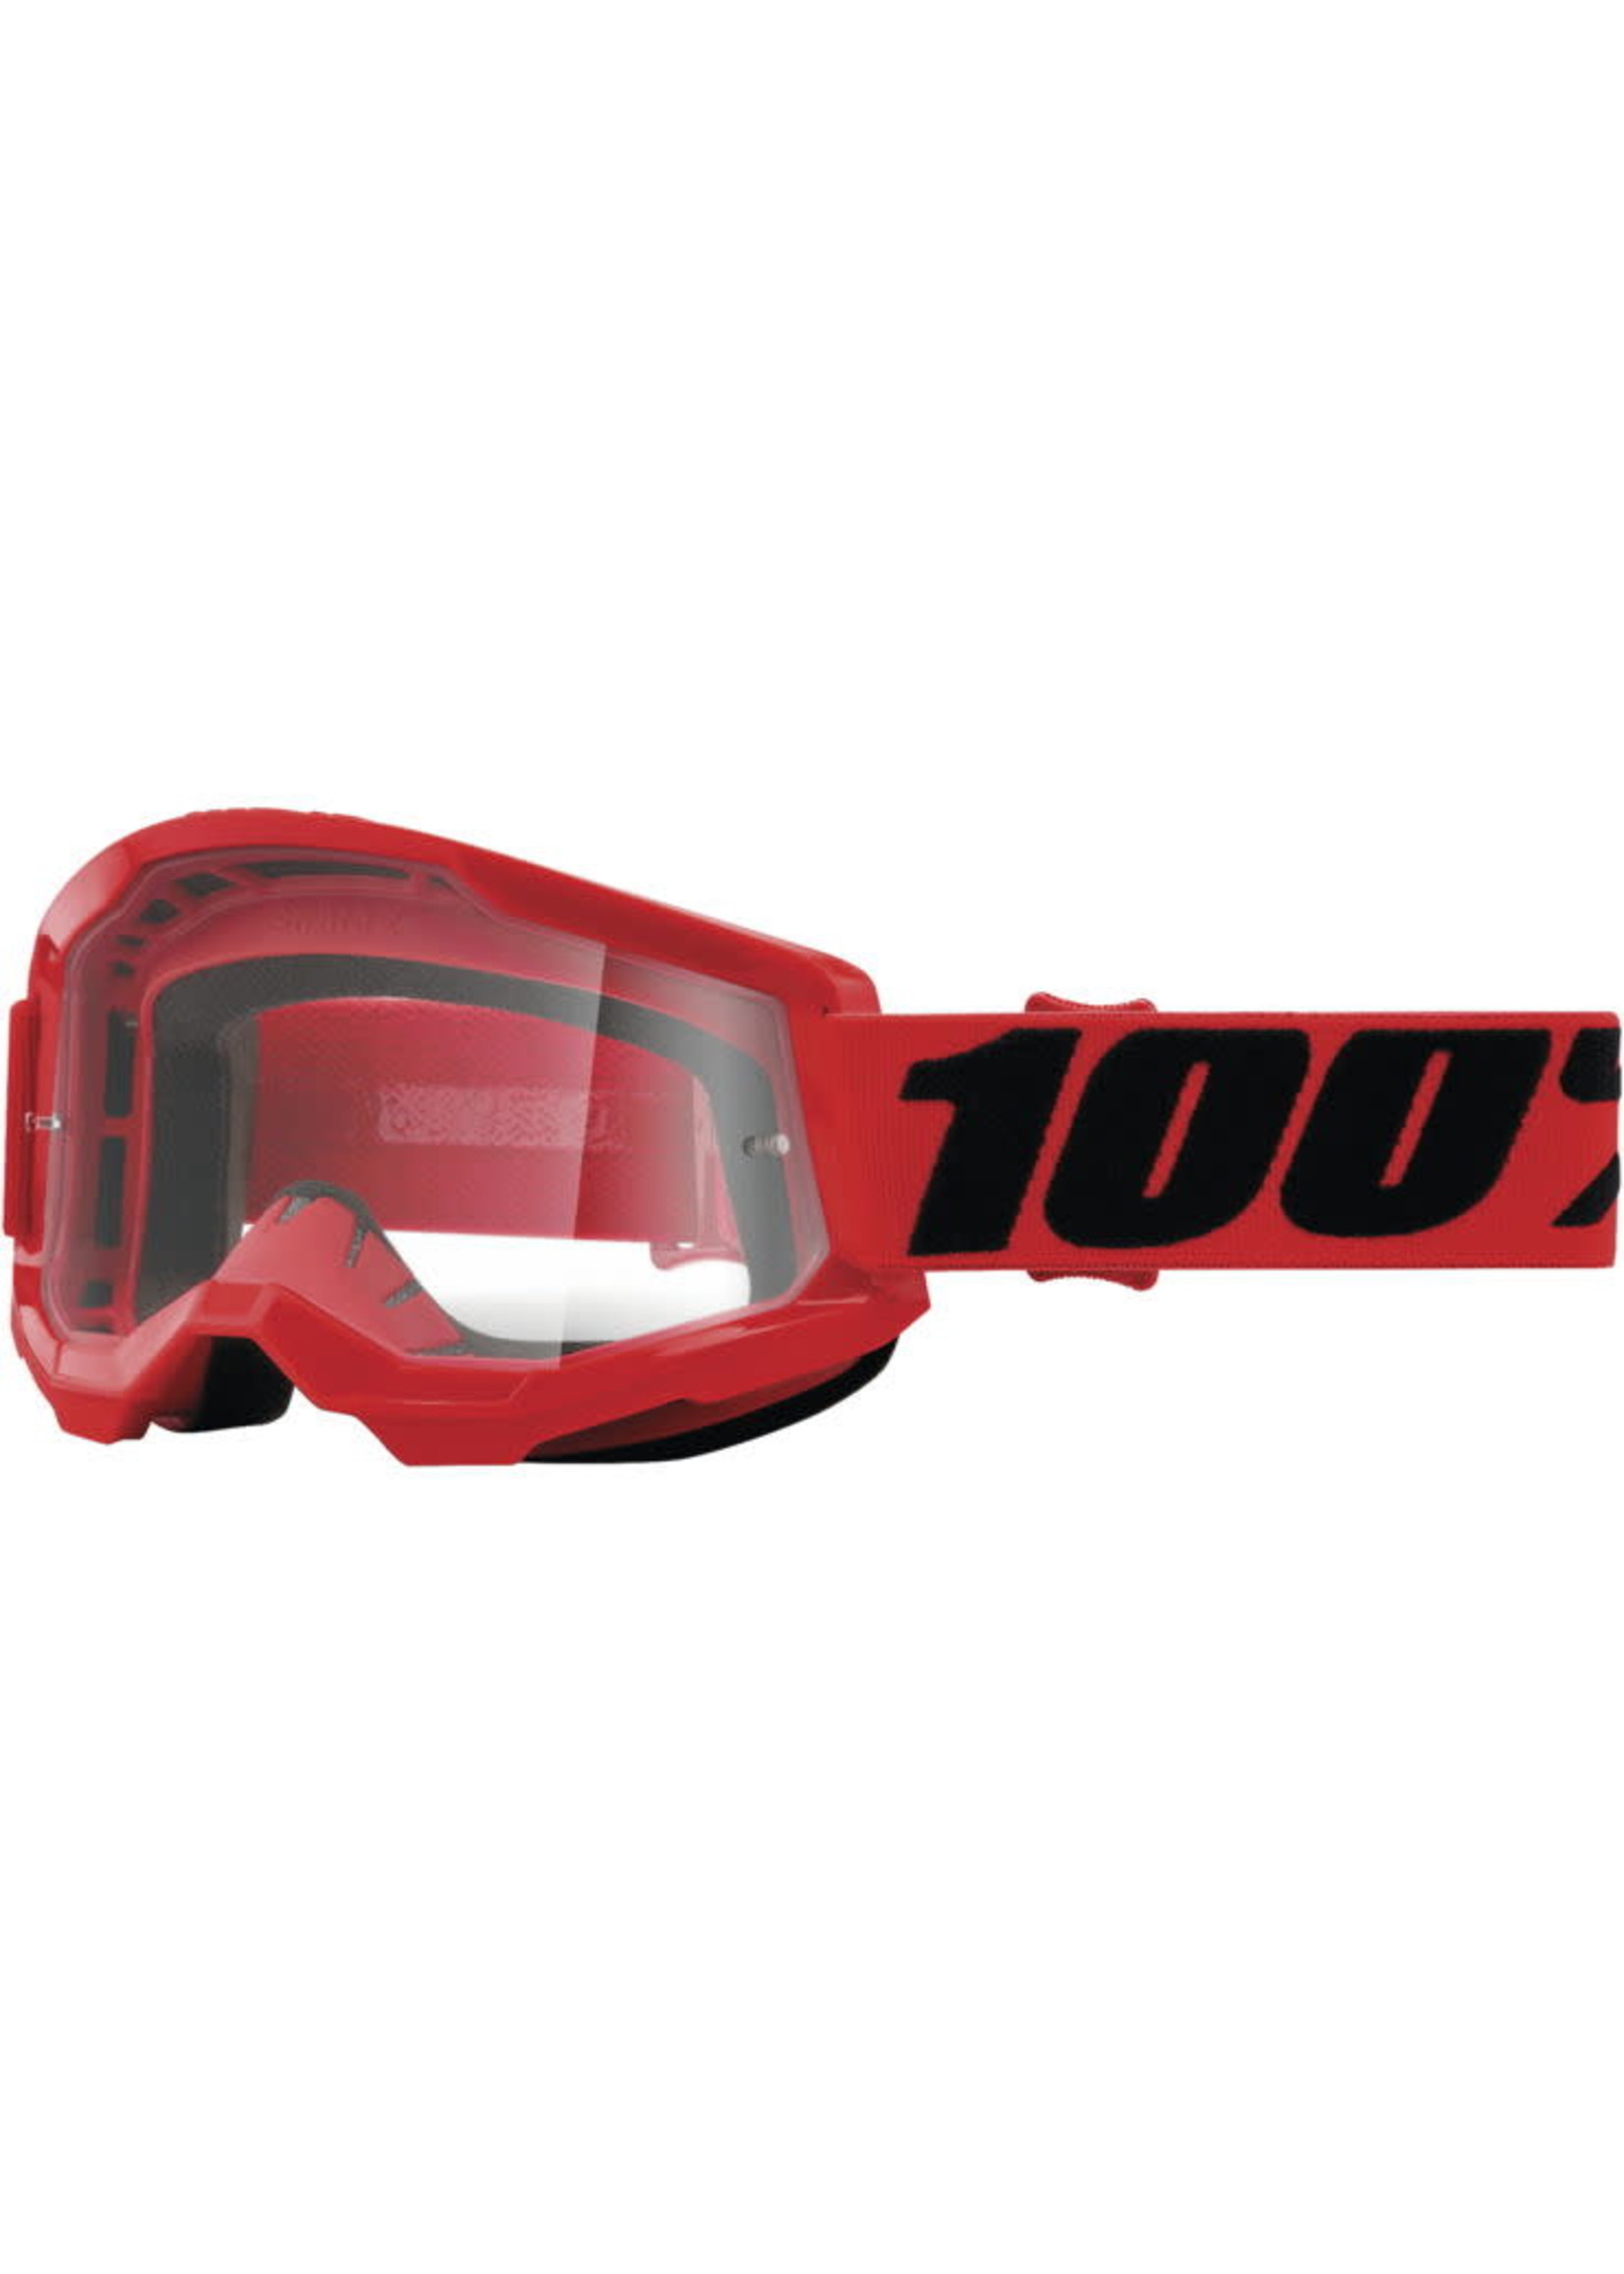 100% 100% STRATA 2 GOGGLE RED WITH CLEAR LENS